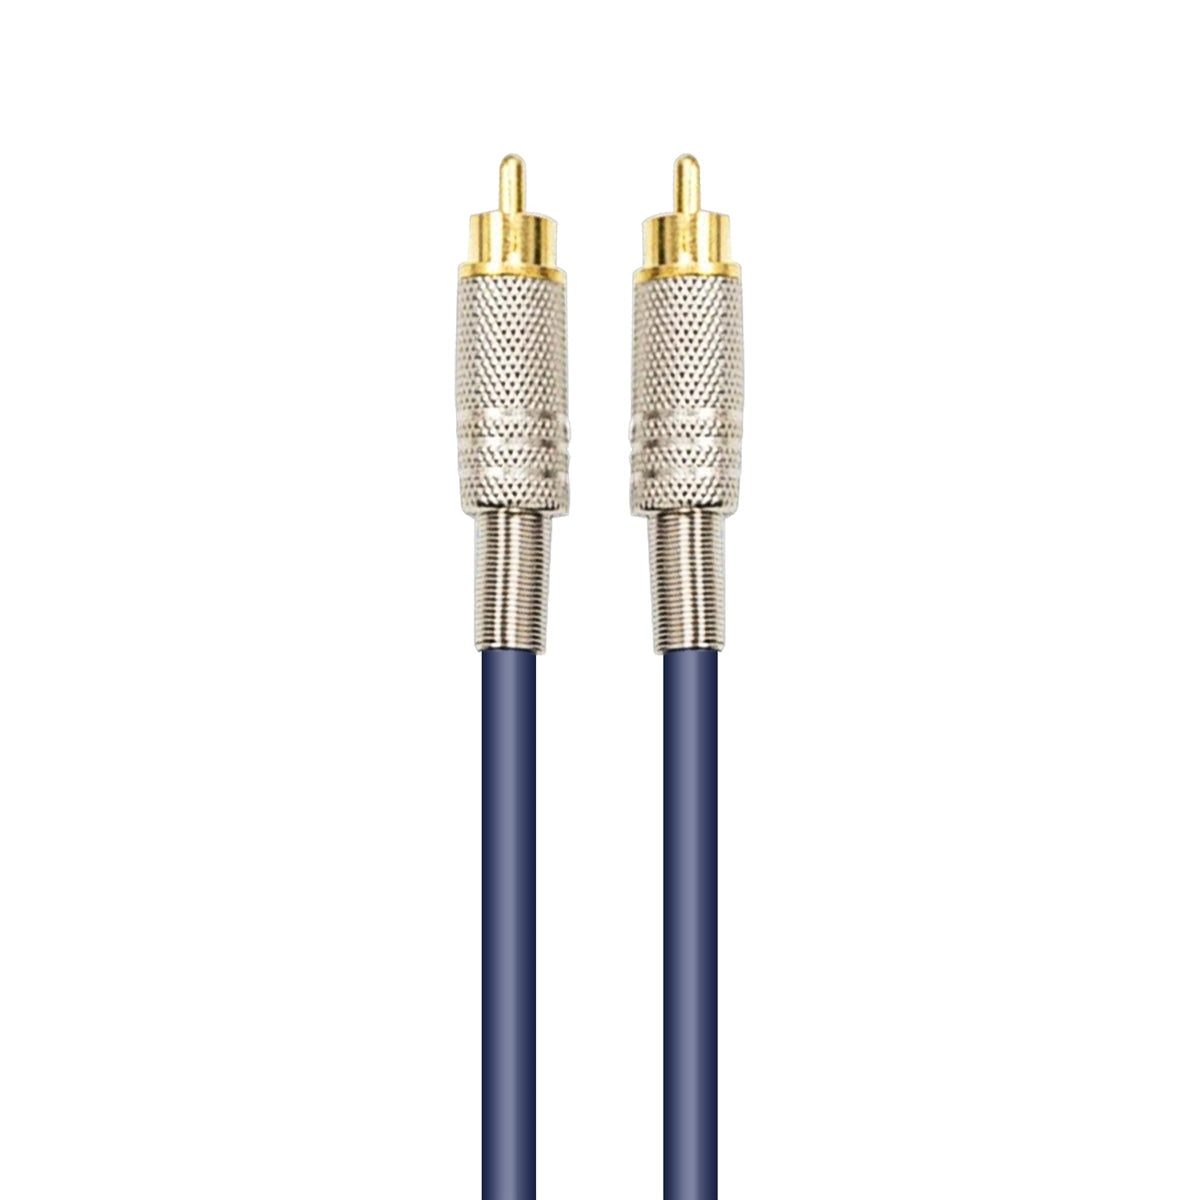 AxcessAbles S/PDIF RCA Male to RCA Male Digital Coaxial Cable for Home Theater/Subwoofer/Hi-Fi (10ft)